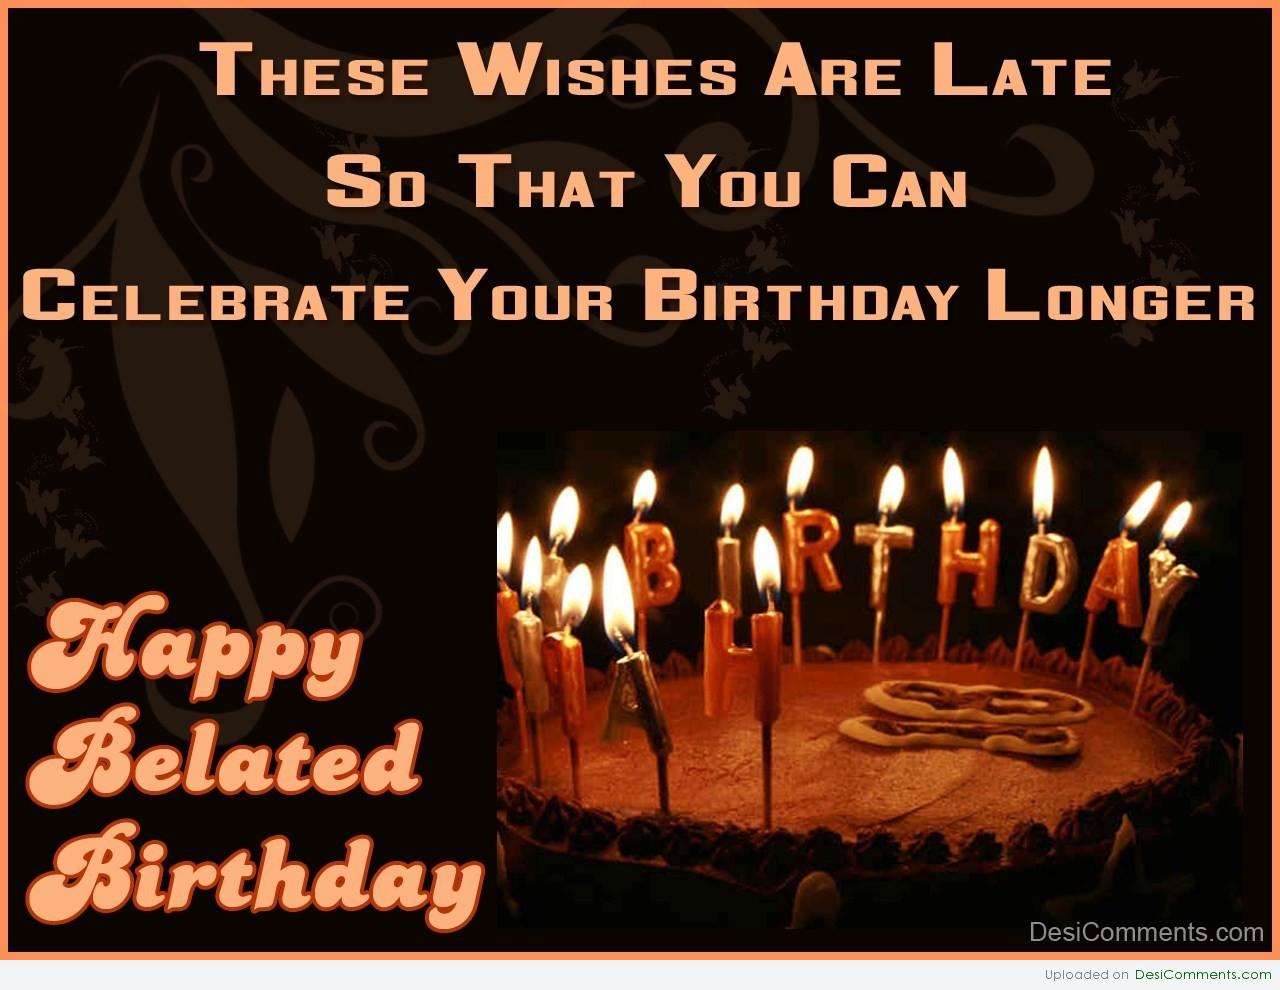 These Wishes Are Late So That You Can Celebrate Your Birthday Longer Happy Belated Birthday